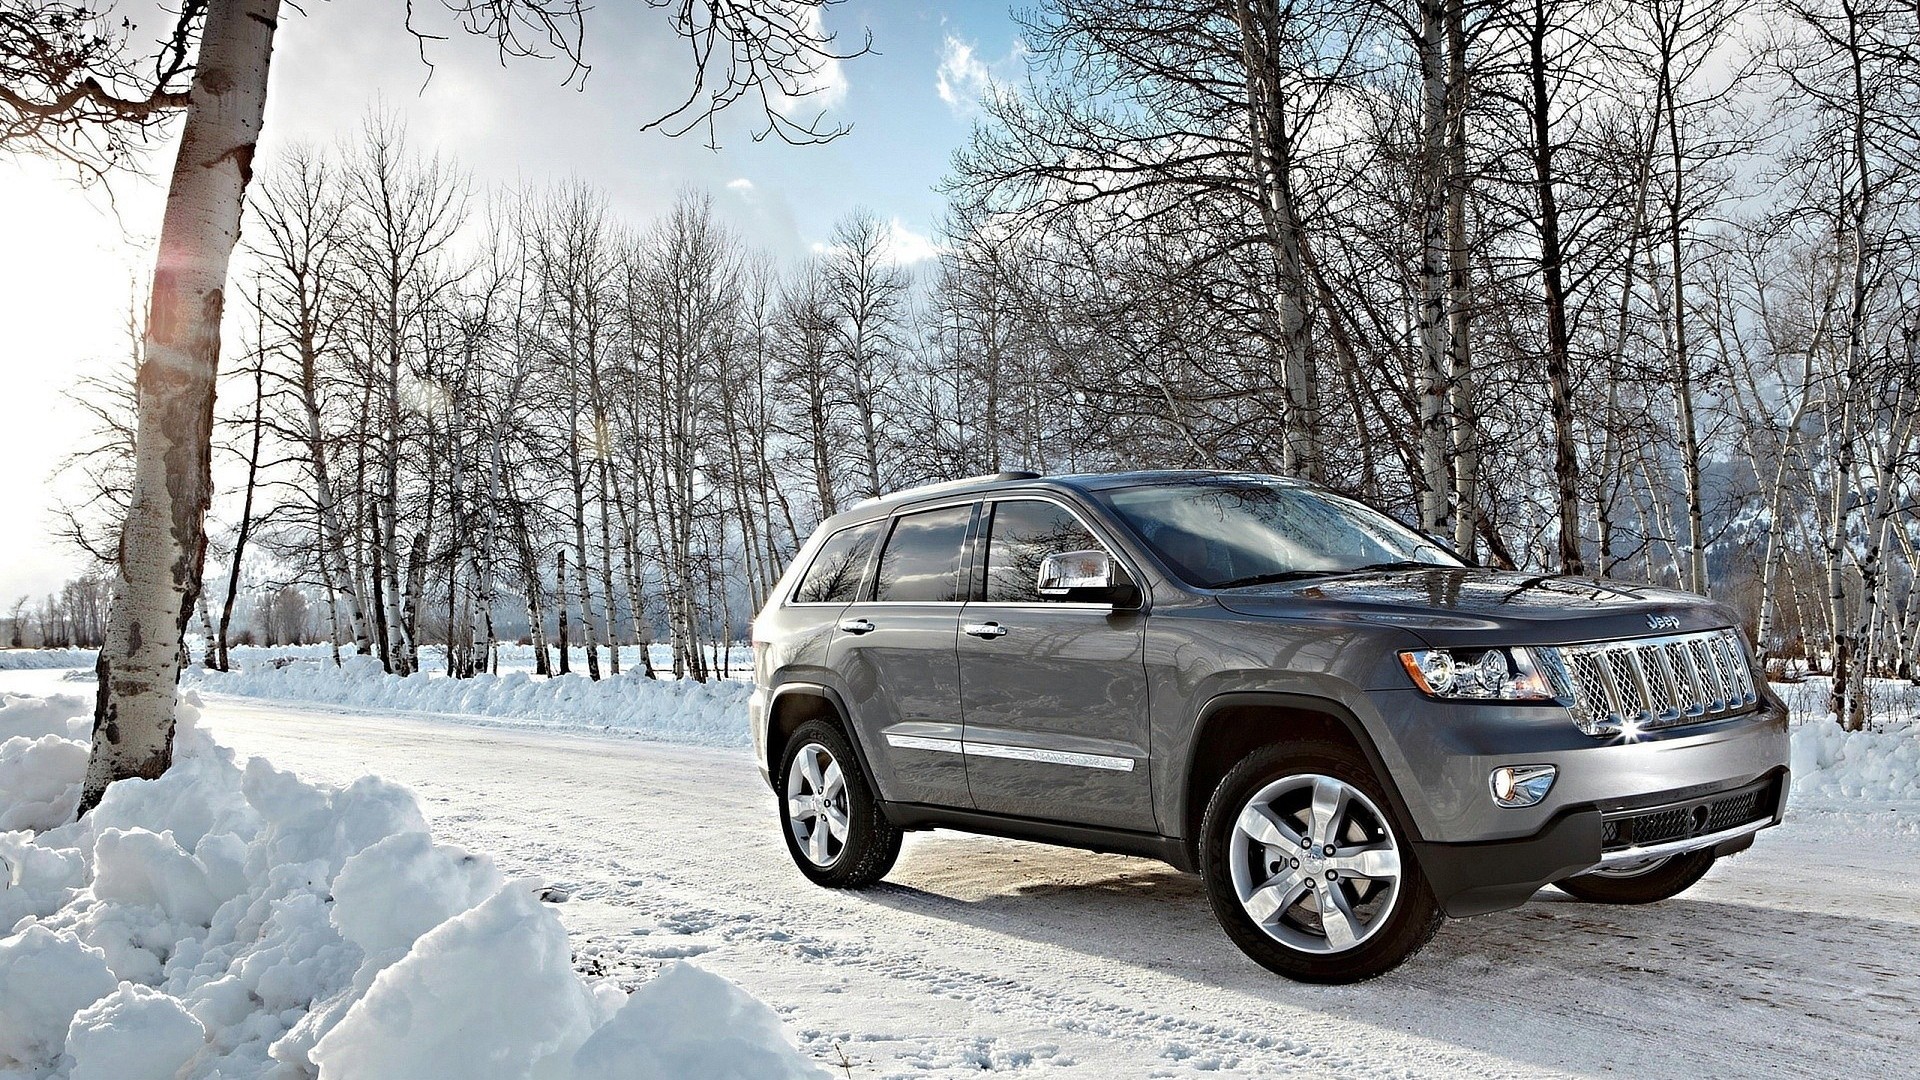 Jeep Grand Cherokee In Snow 1920x1080 Car - 9to5 Car Wallpapers